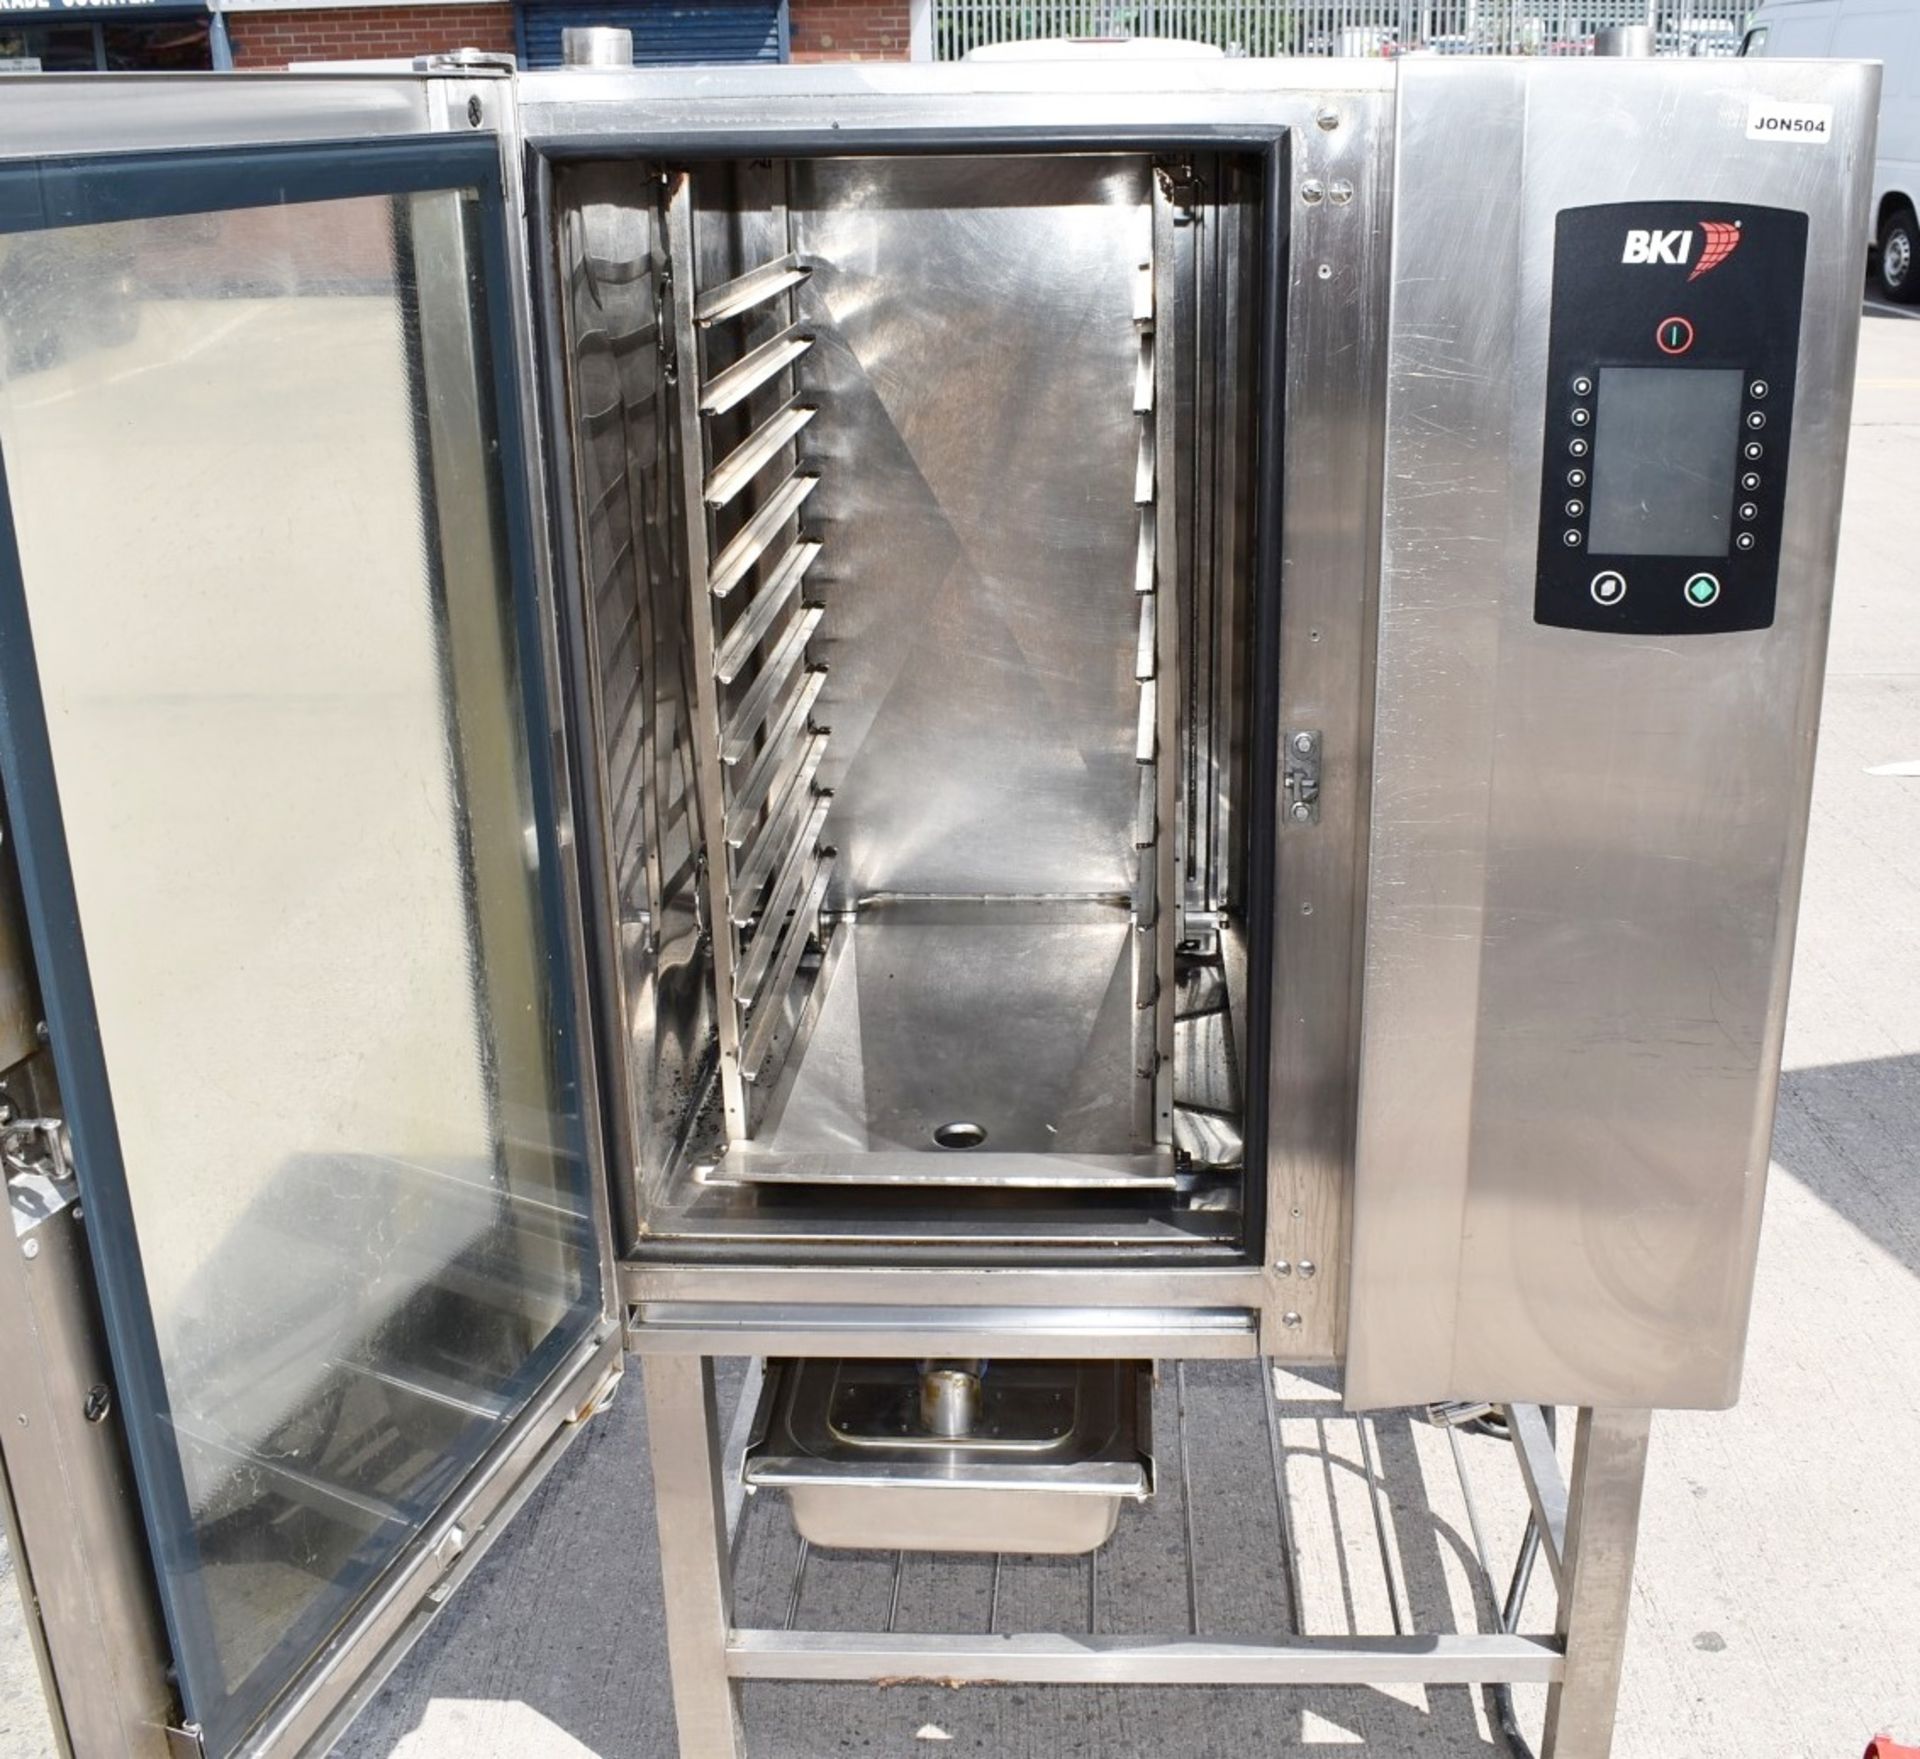 1 x Houno CPE 1.06 Electric Combi Oven - 3 Phase Combi Oven With Various Pre-Set Cooking Options - Image 11 of 14